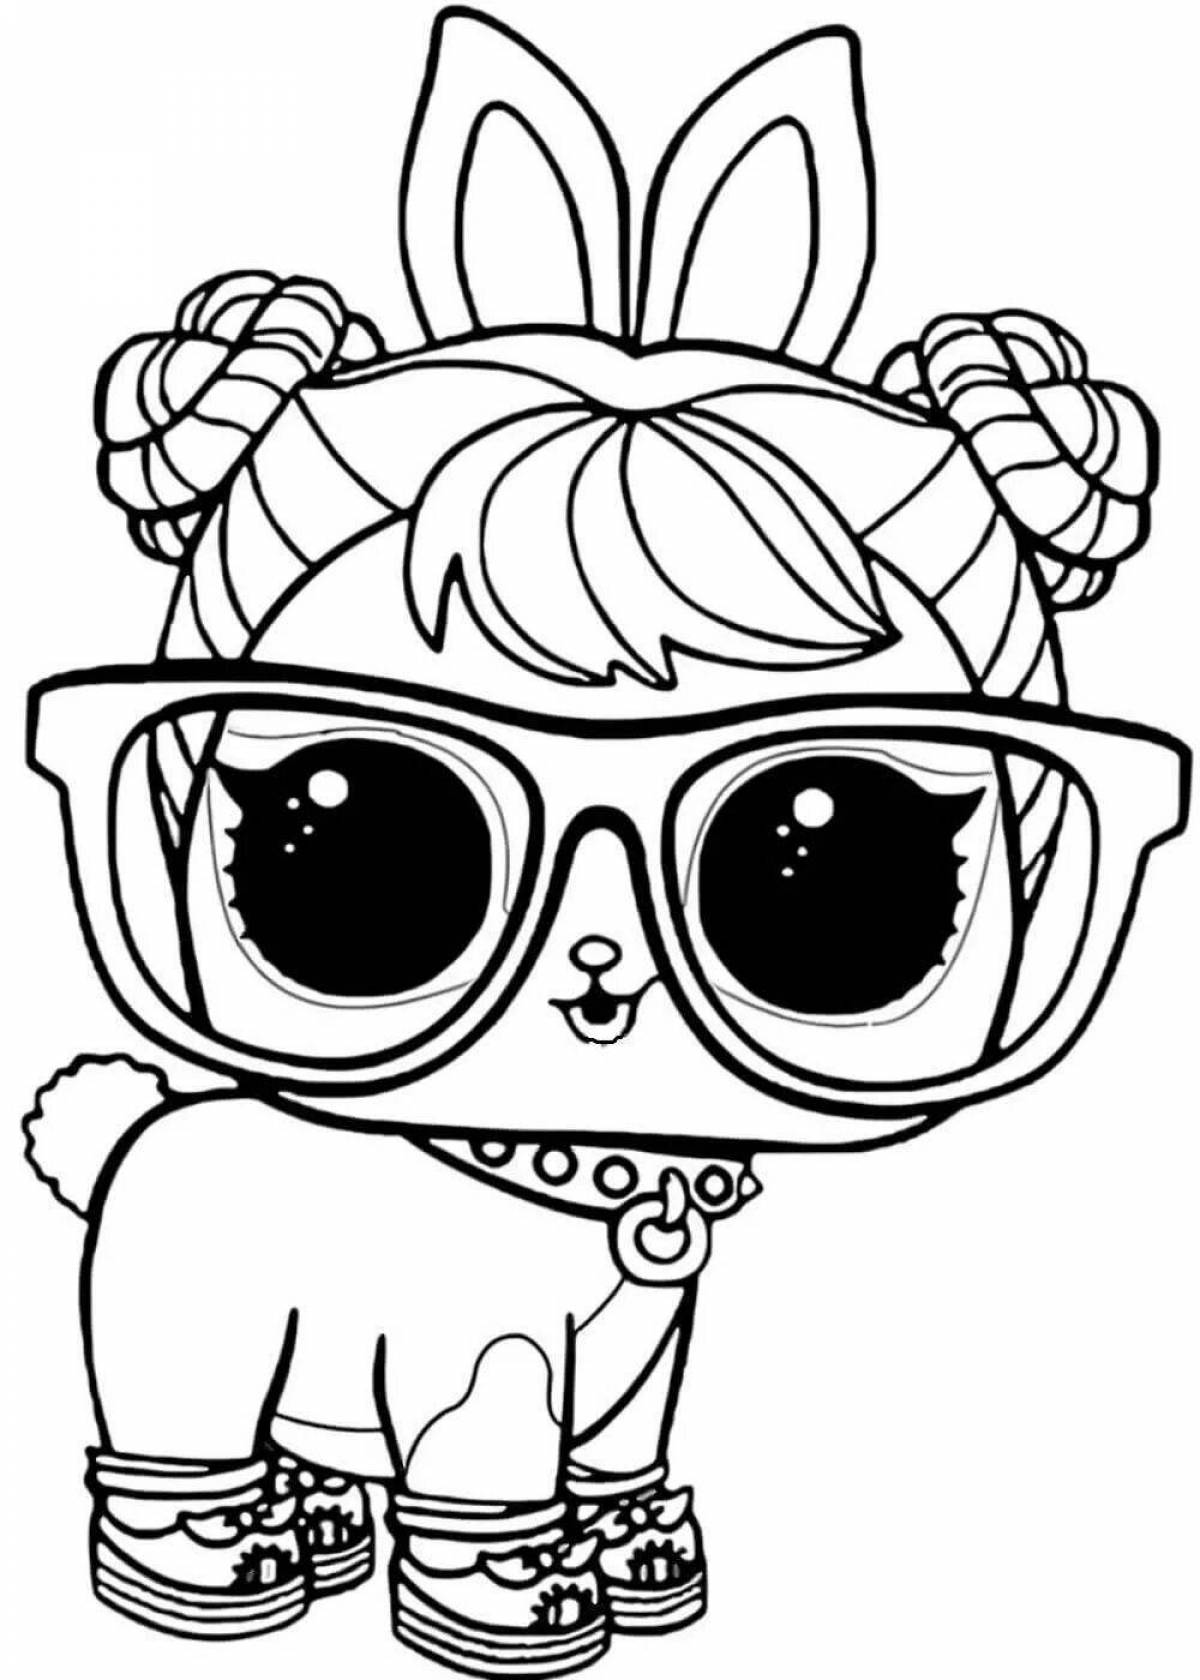 Radiant coloring page lol dolls